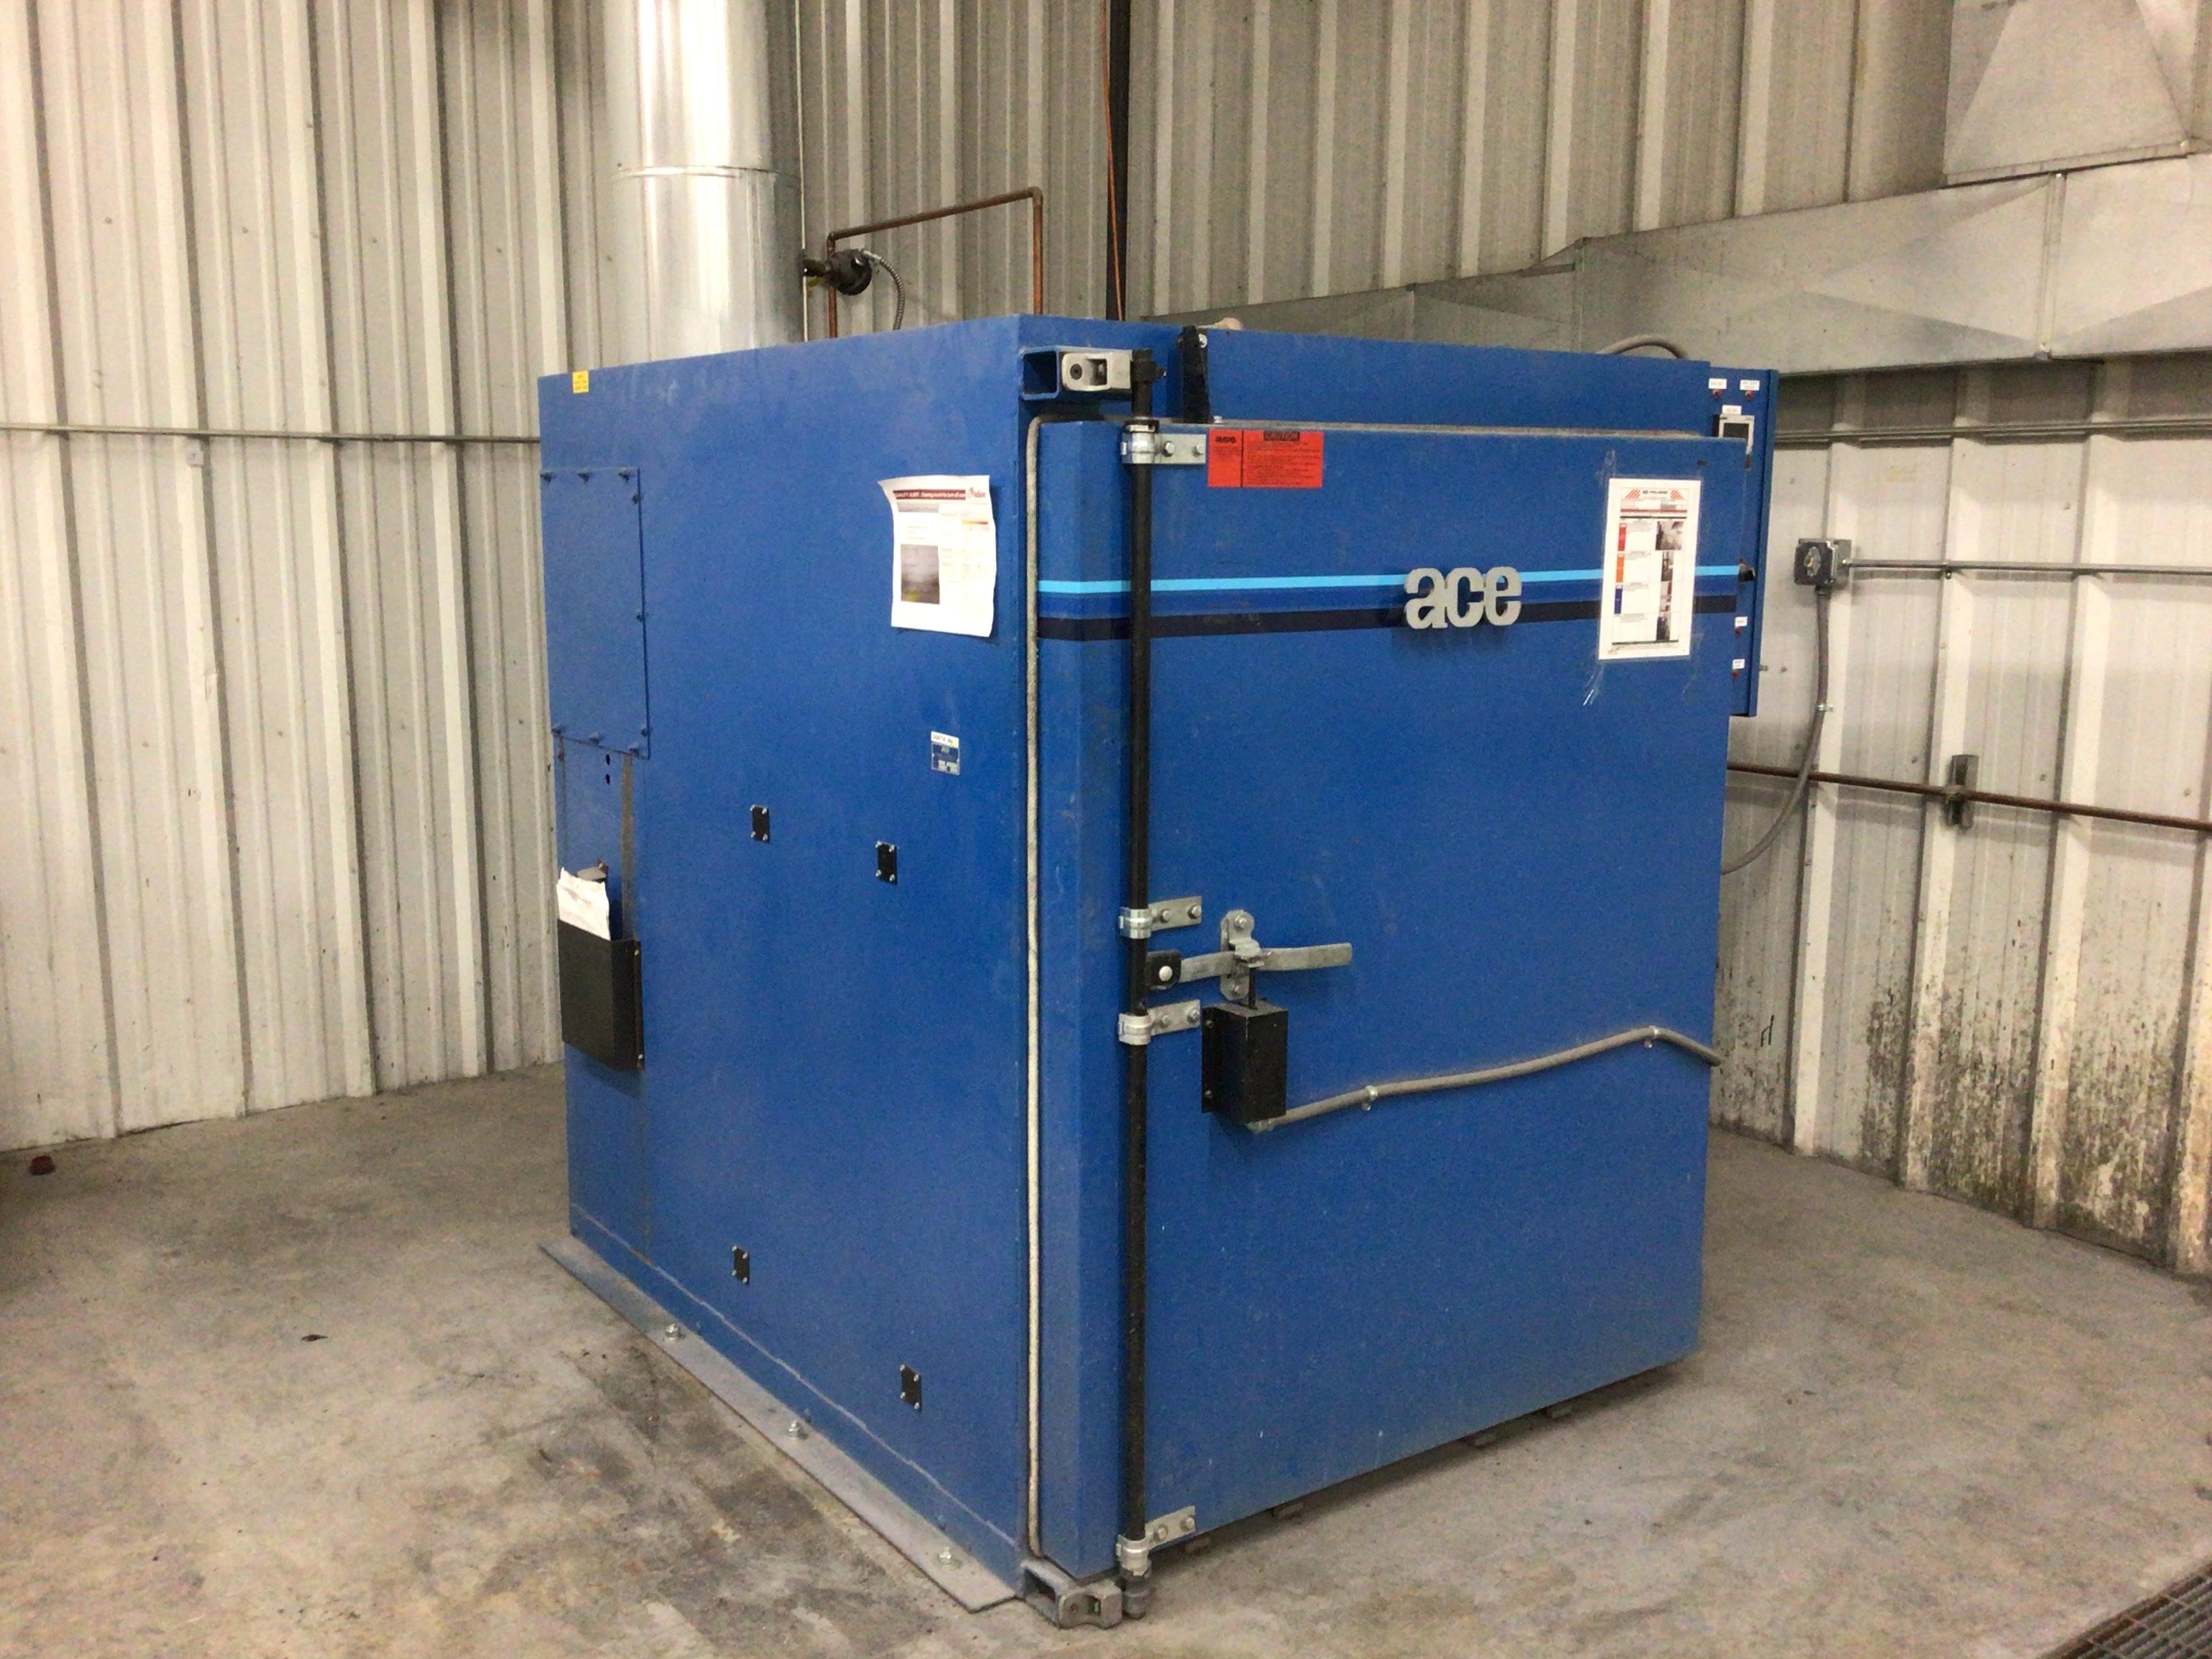 6 Tips to Buy Powder Coating Ovens - Armature Coil Equipment Blog